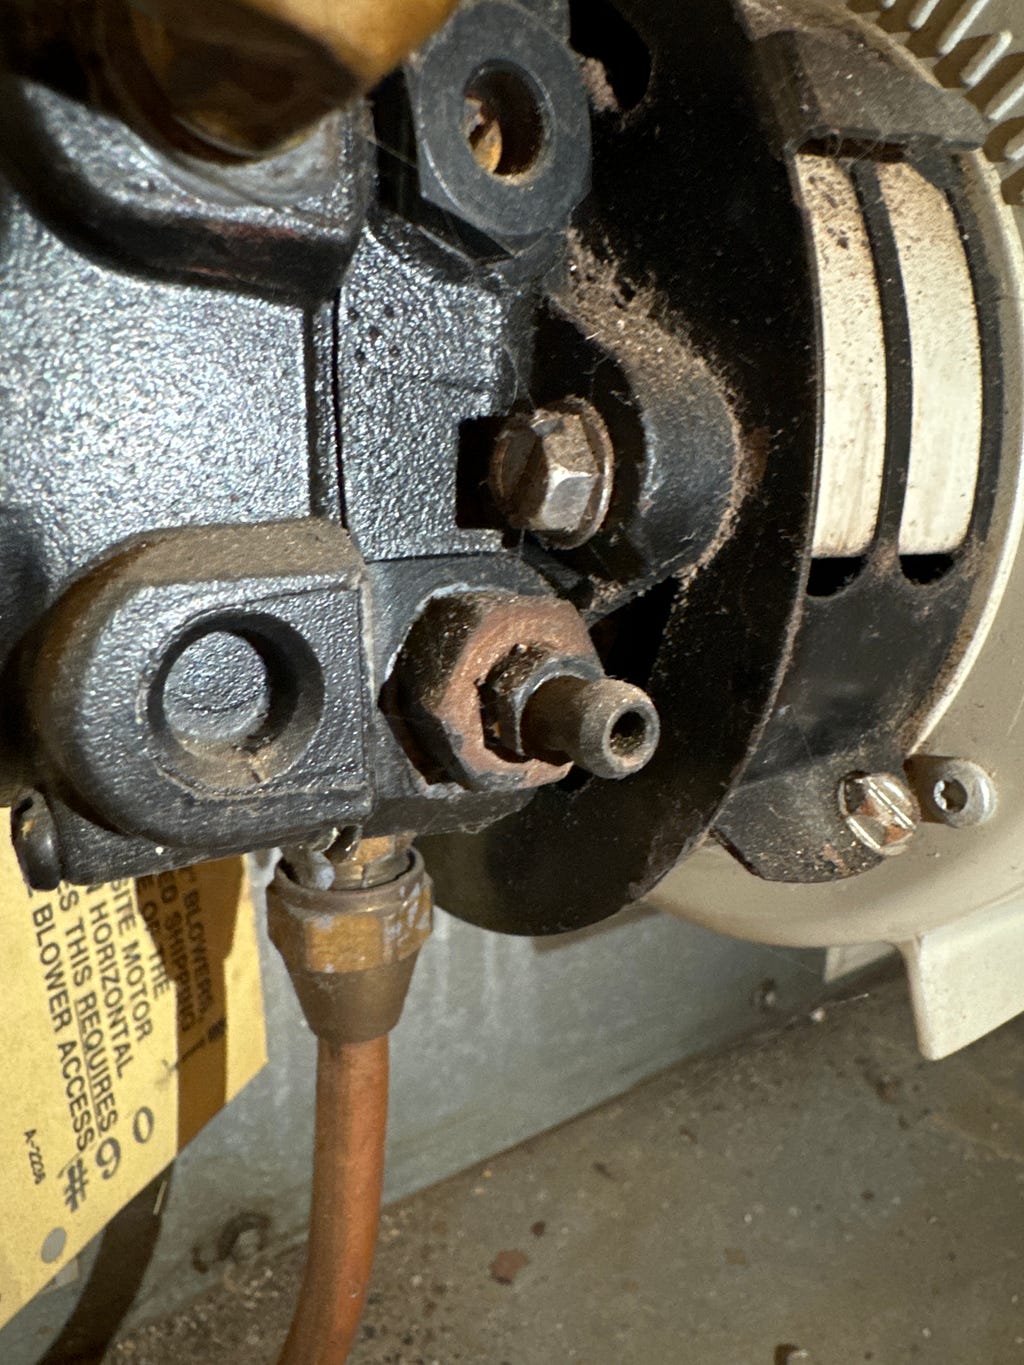 Detailed view of a Beckett oil burner’s pump and coupling assembly, highlighting the copper supply line and adjustment screws. The components show signs of wear and oil residue, indicating frequent use and the need for maintenance.